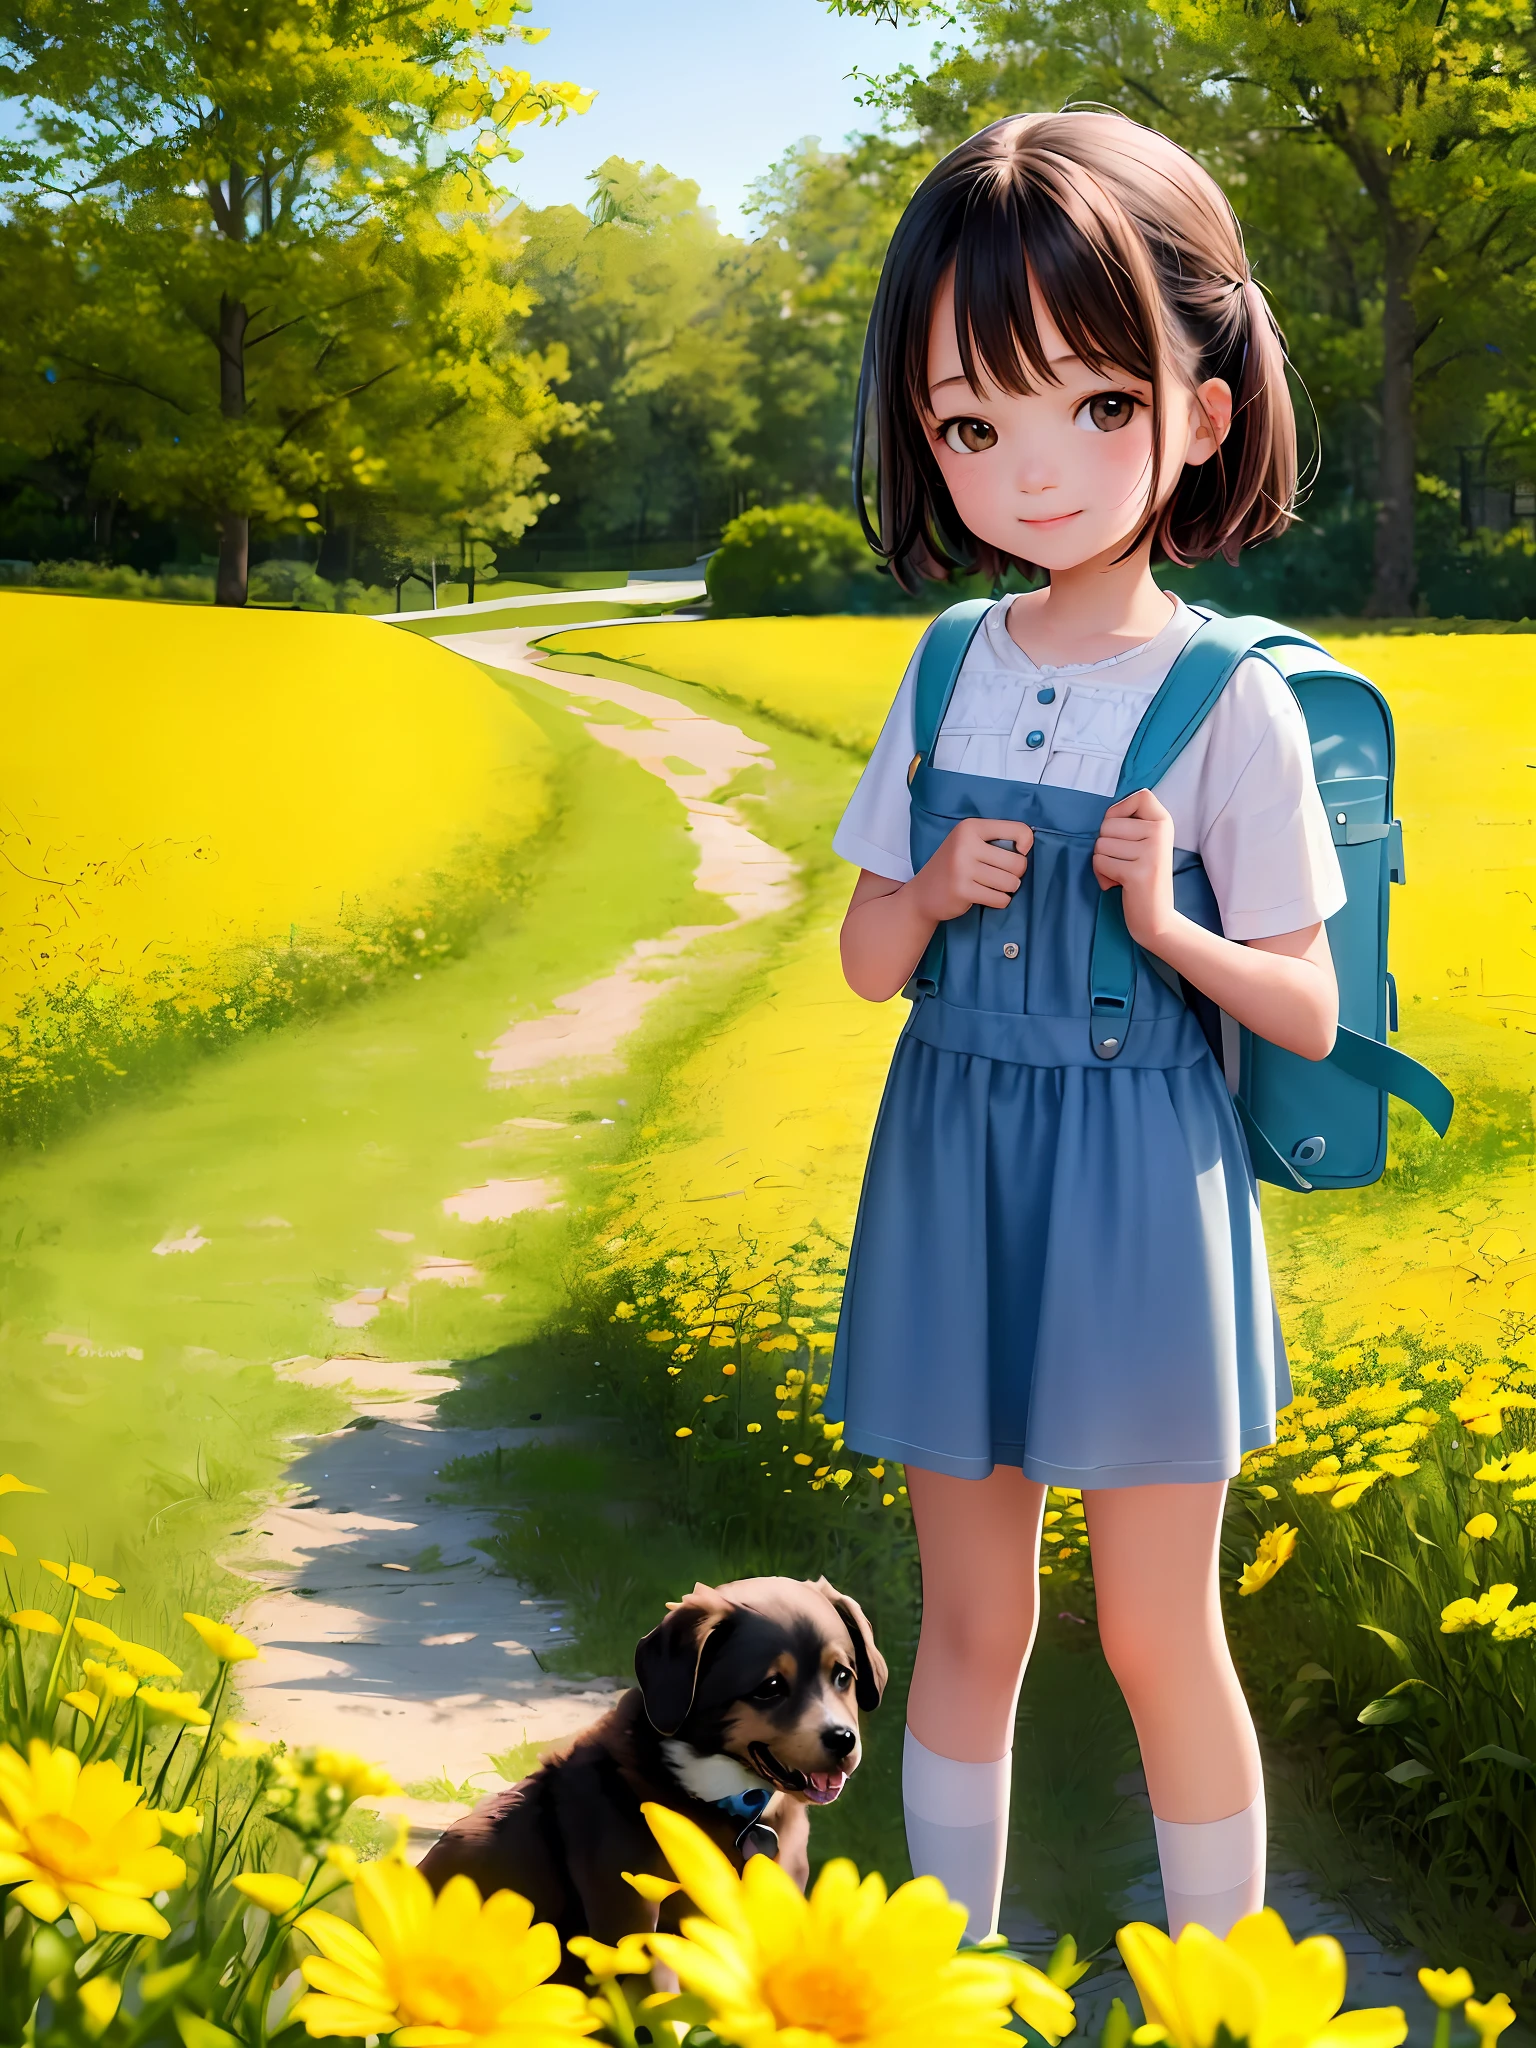 Tip: A very charming  with a backpack and her cute puppy enjoying a lovely spring outing surrounded by beautiful yellow flowers and nature. The illustration is a high-definition illustration in 4k resolution, featuring highly detailed facial features and cartoon-style visuals.